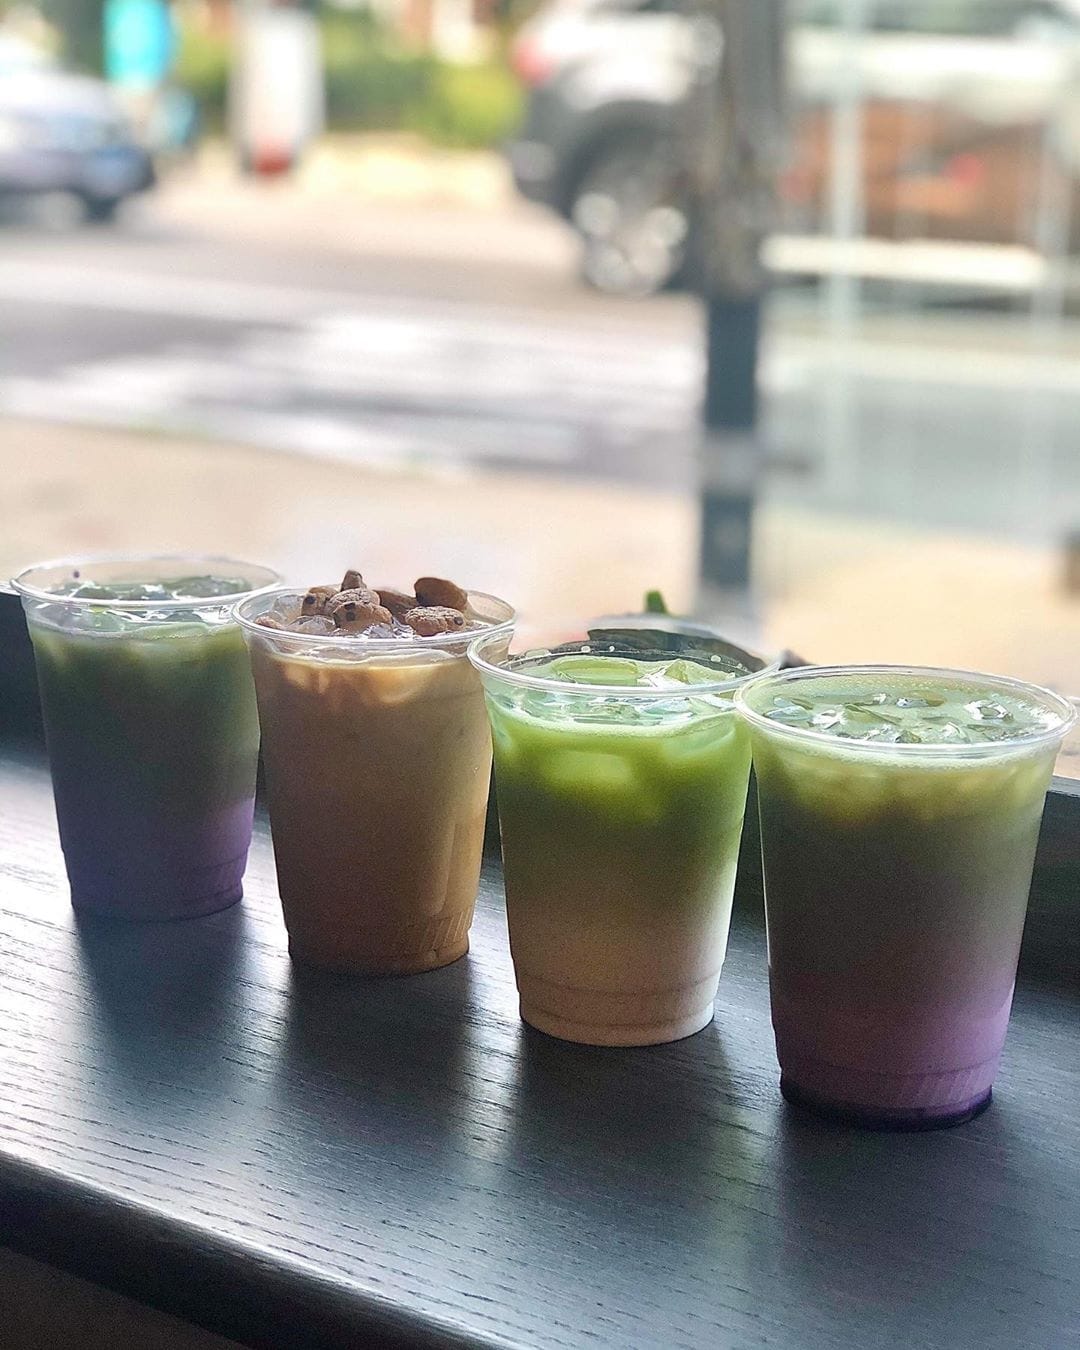 A picture of several colorful lattes